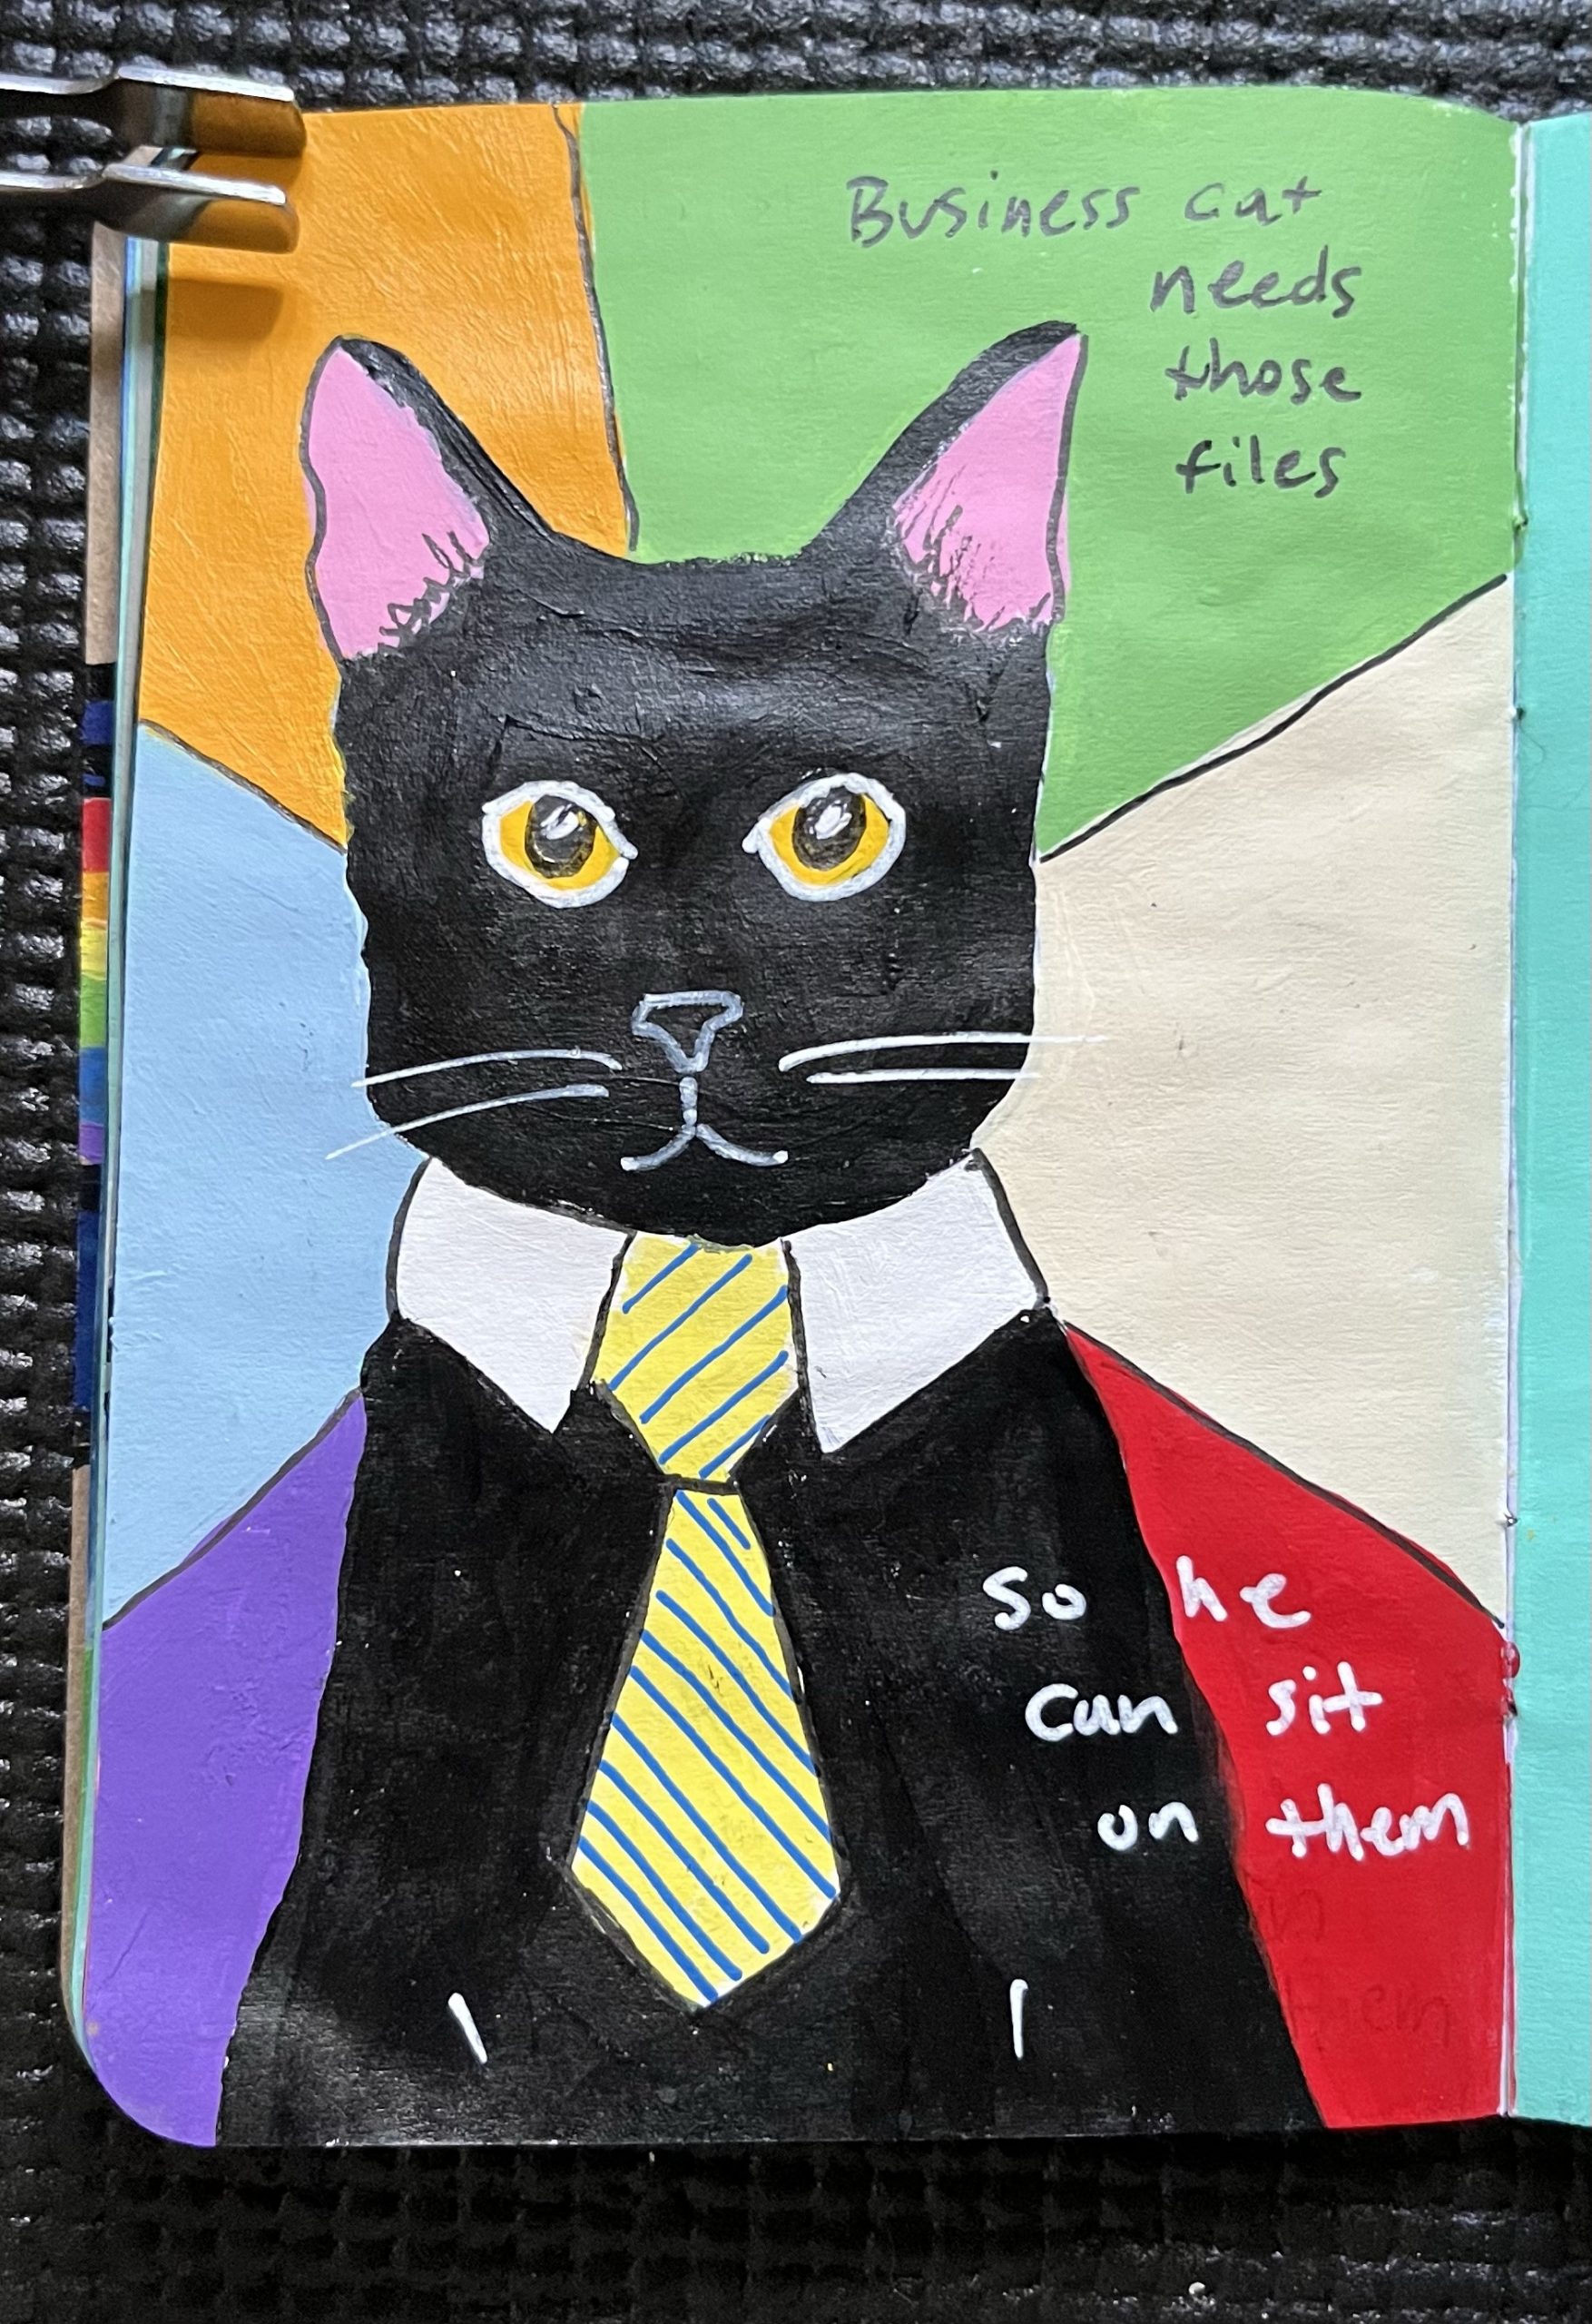 A painted black cat in a tie sits in front of a colorful backdrop.